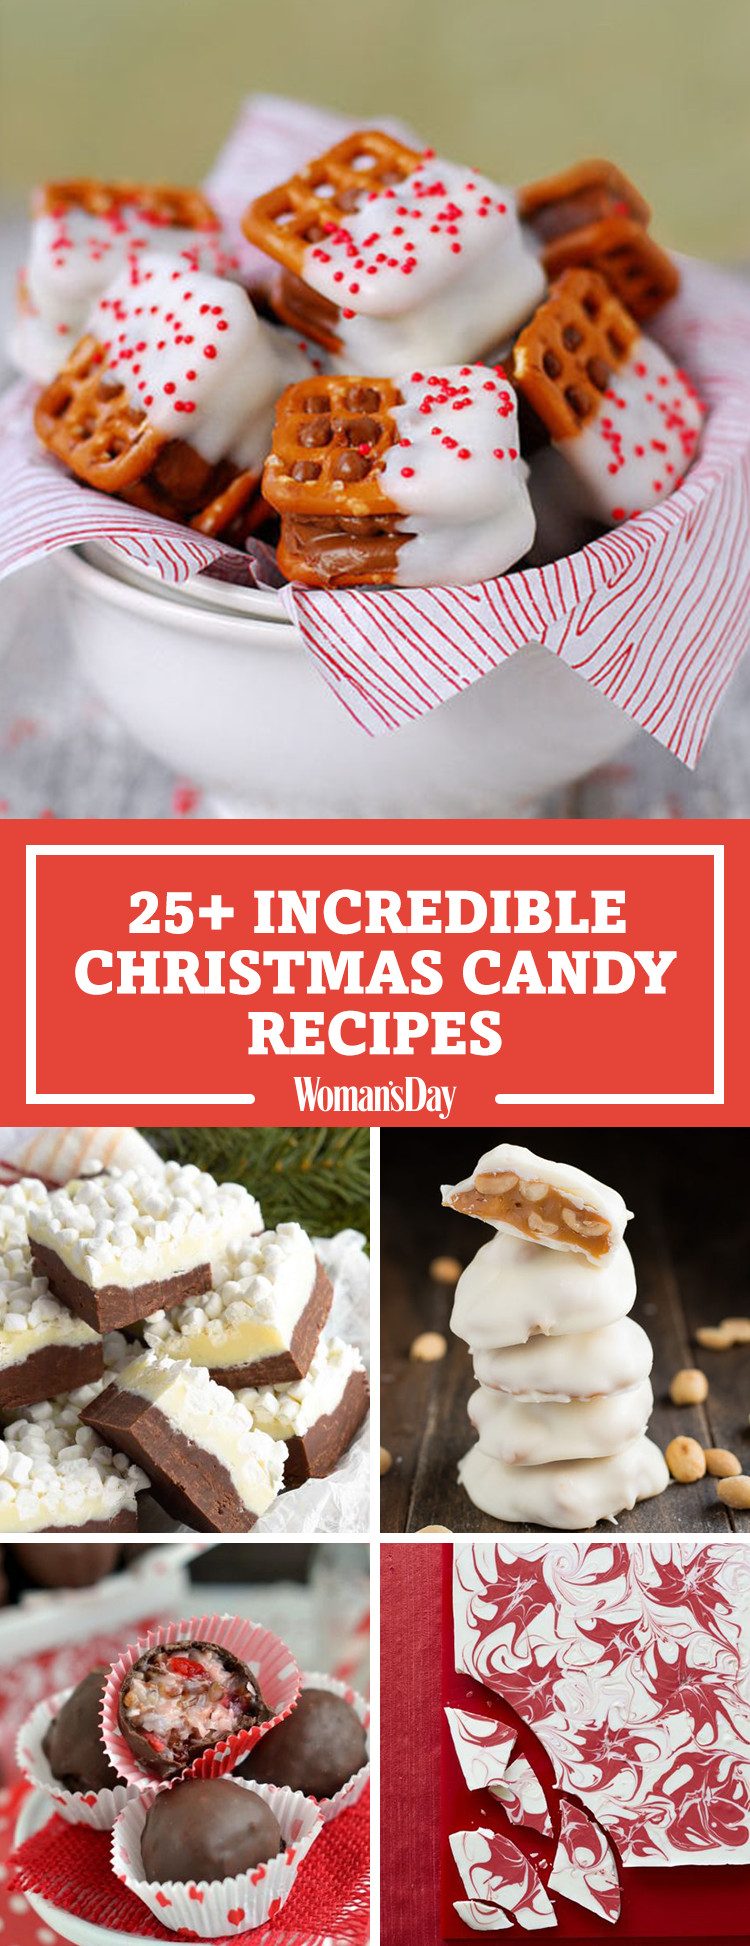 Christmas Candy Recipes With Pictures
 28 Homemade Christmas Candy Recipes How To Make Your Own